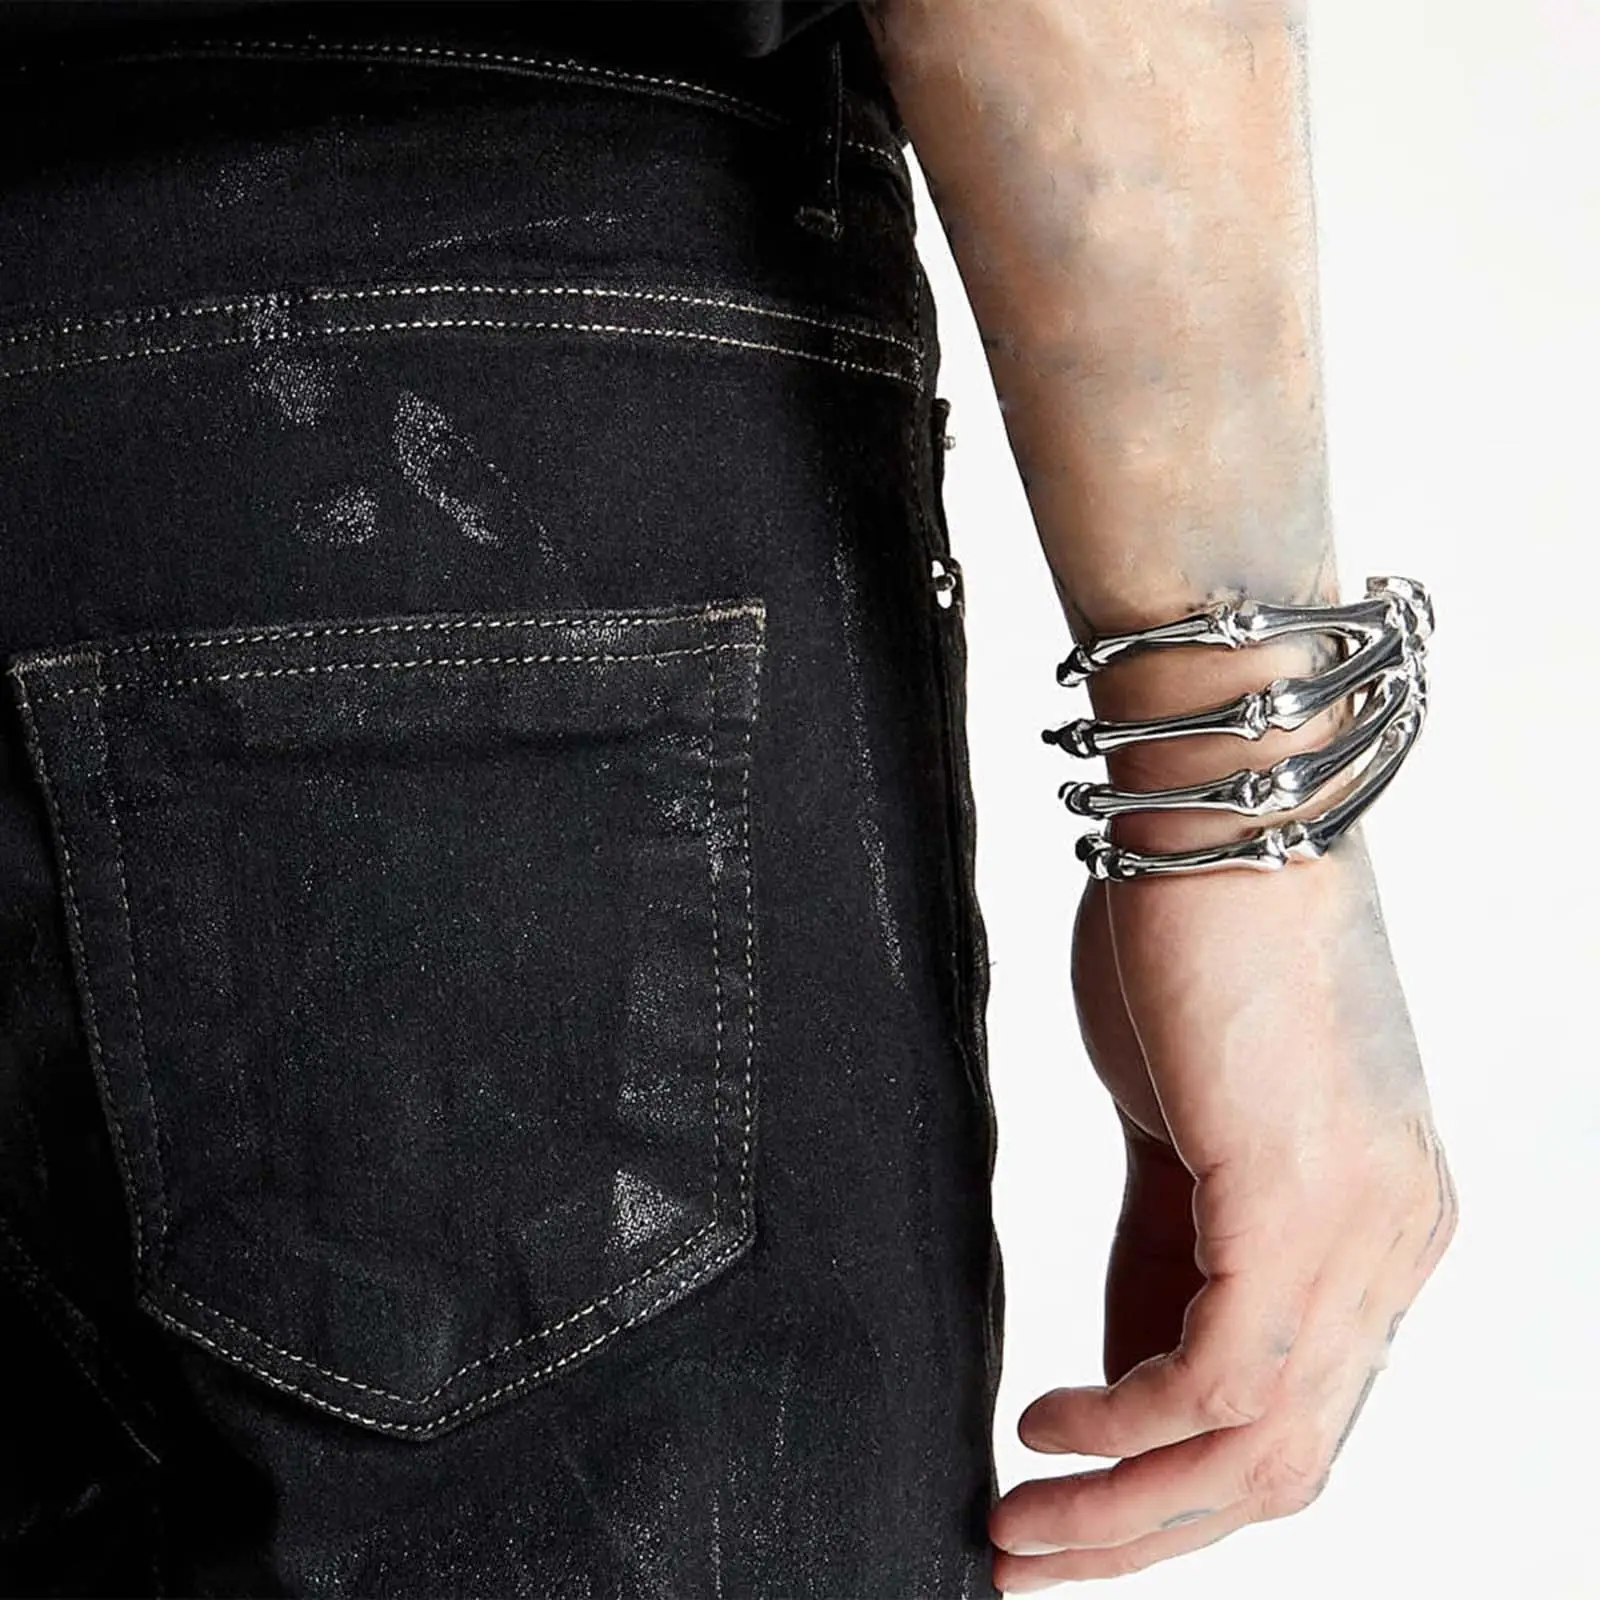 Punk Skeleton Bracelet Fashion Jewelry Hand Claw Arm Ring Bangle Hand Chain for Halloween Rave Parties Easter Concert Hip Hop